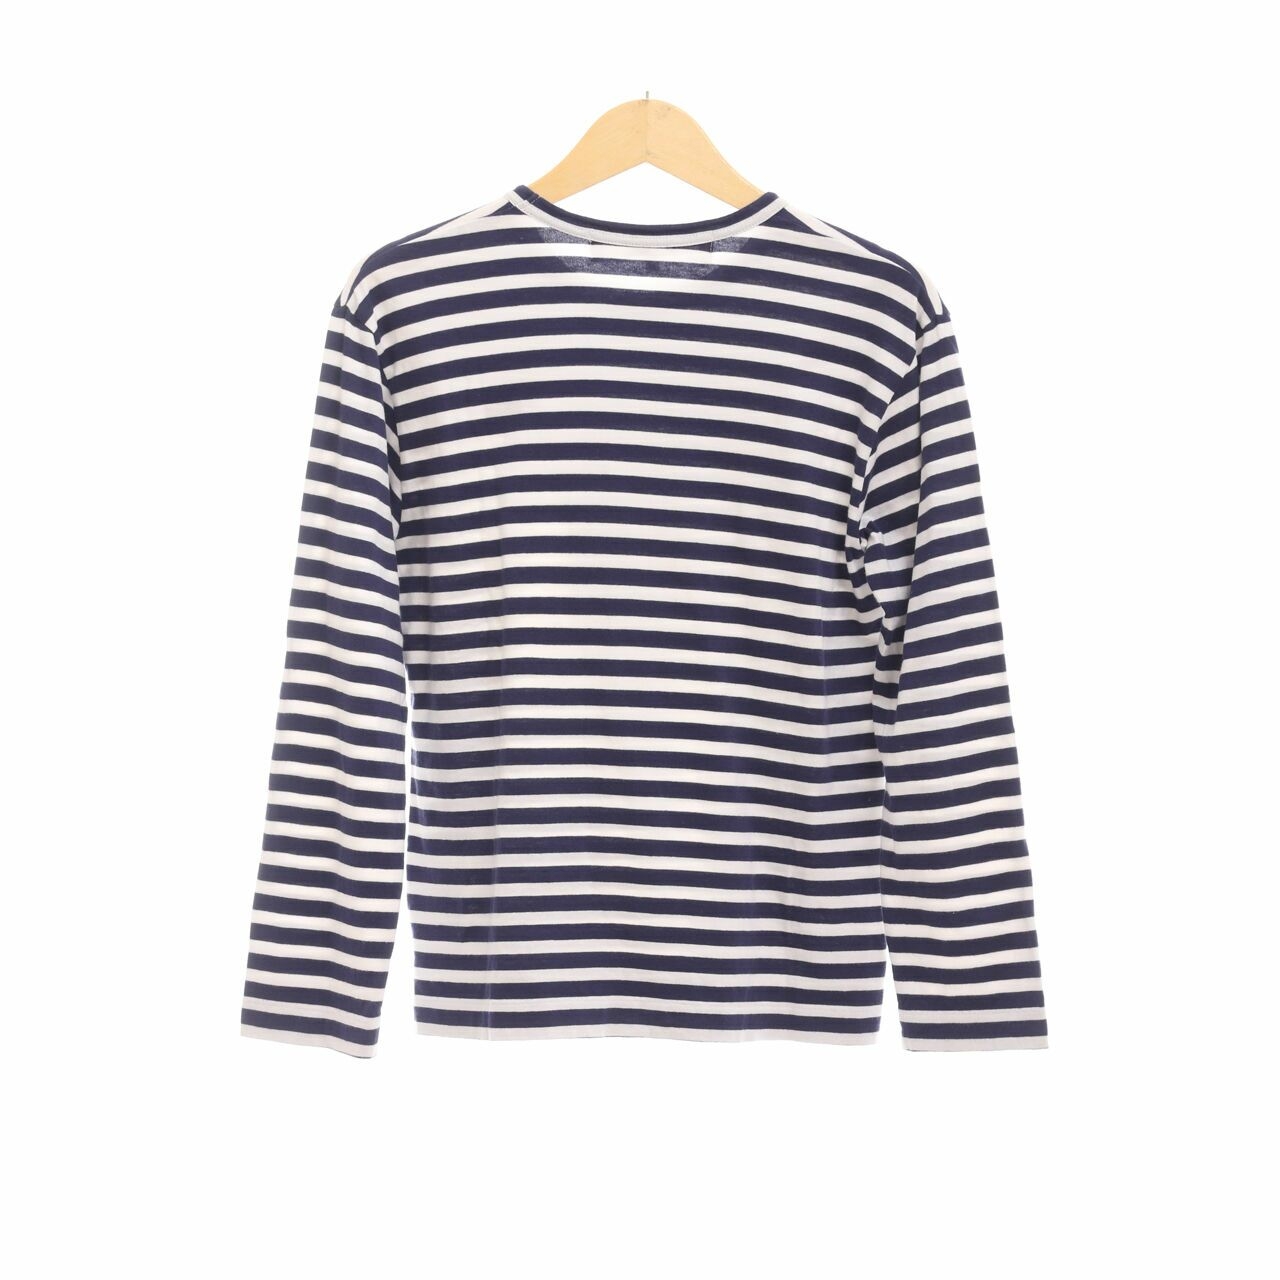 Play by Comme des Garcons Blue Stripes T-Shirt